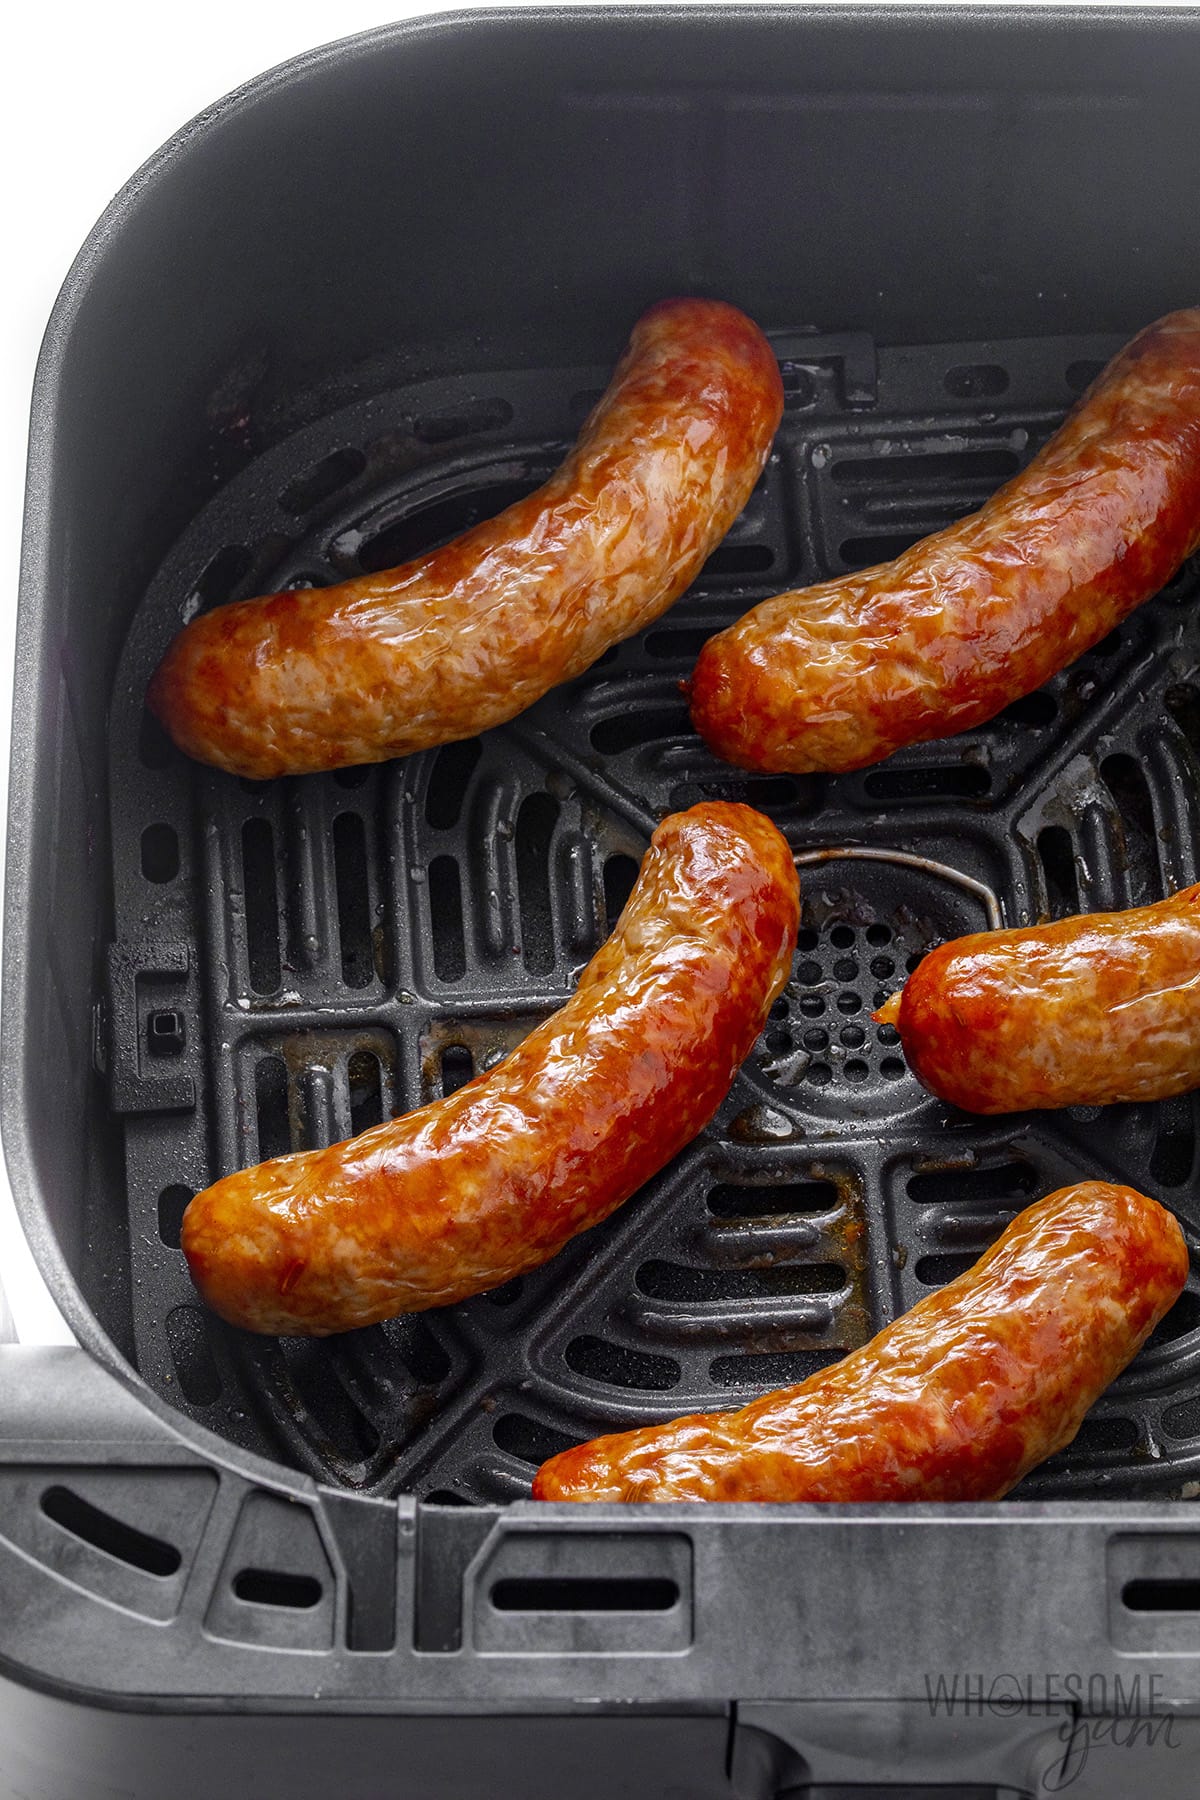 Sausages in the air fryer basket.